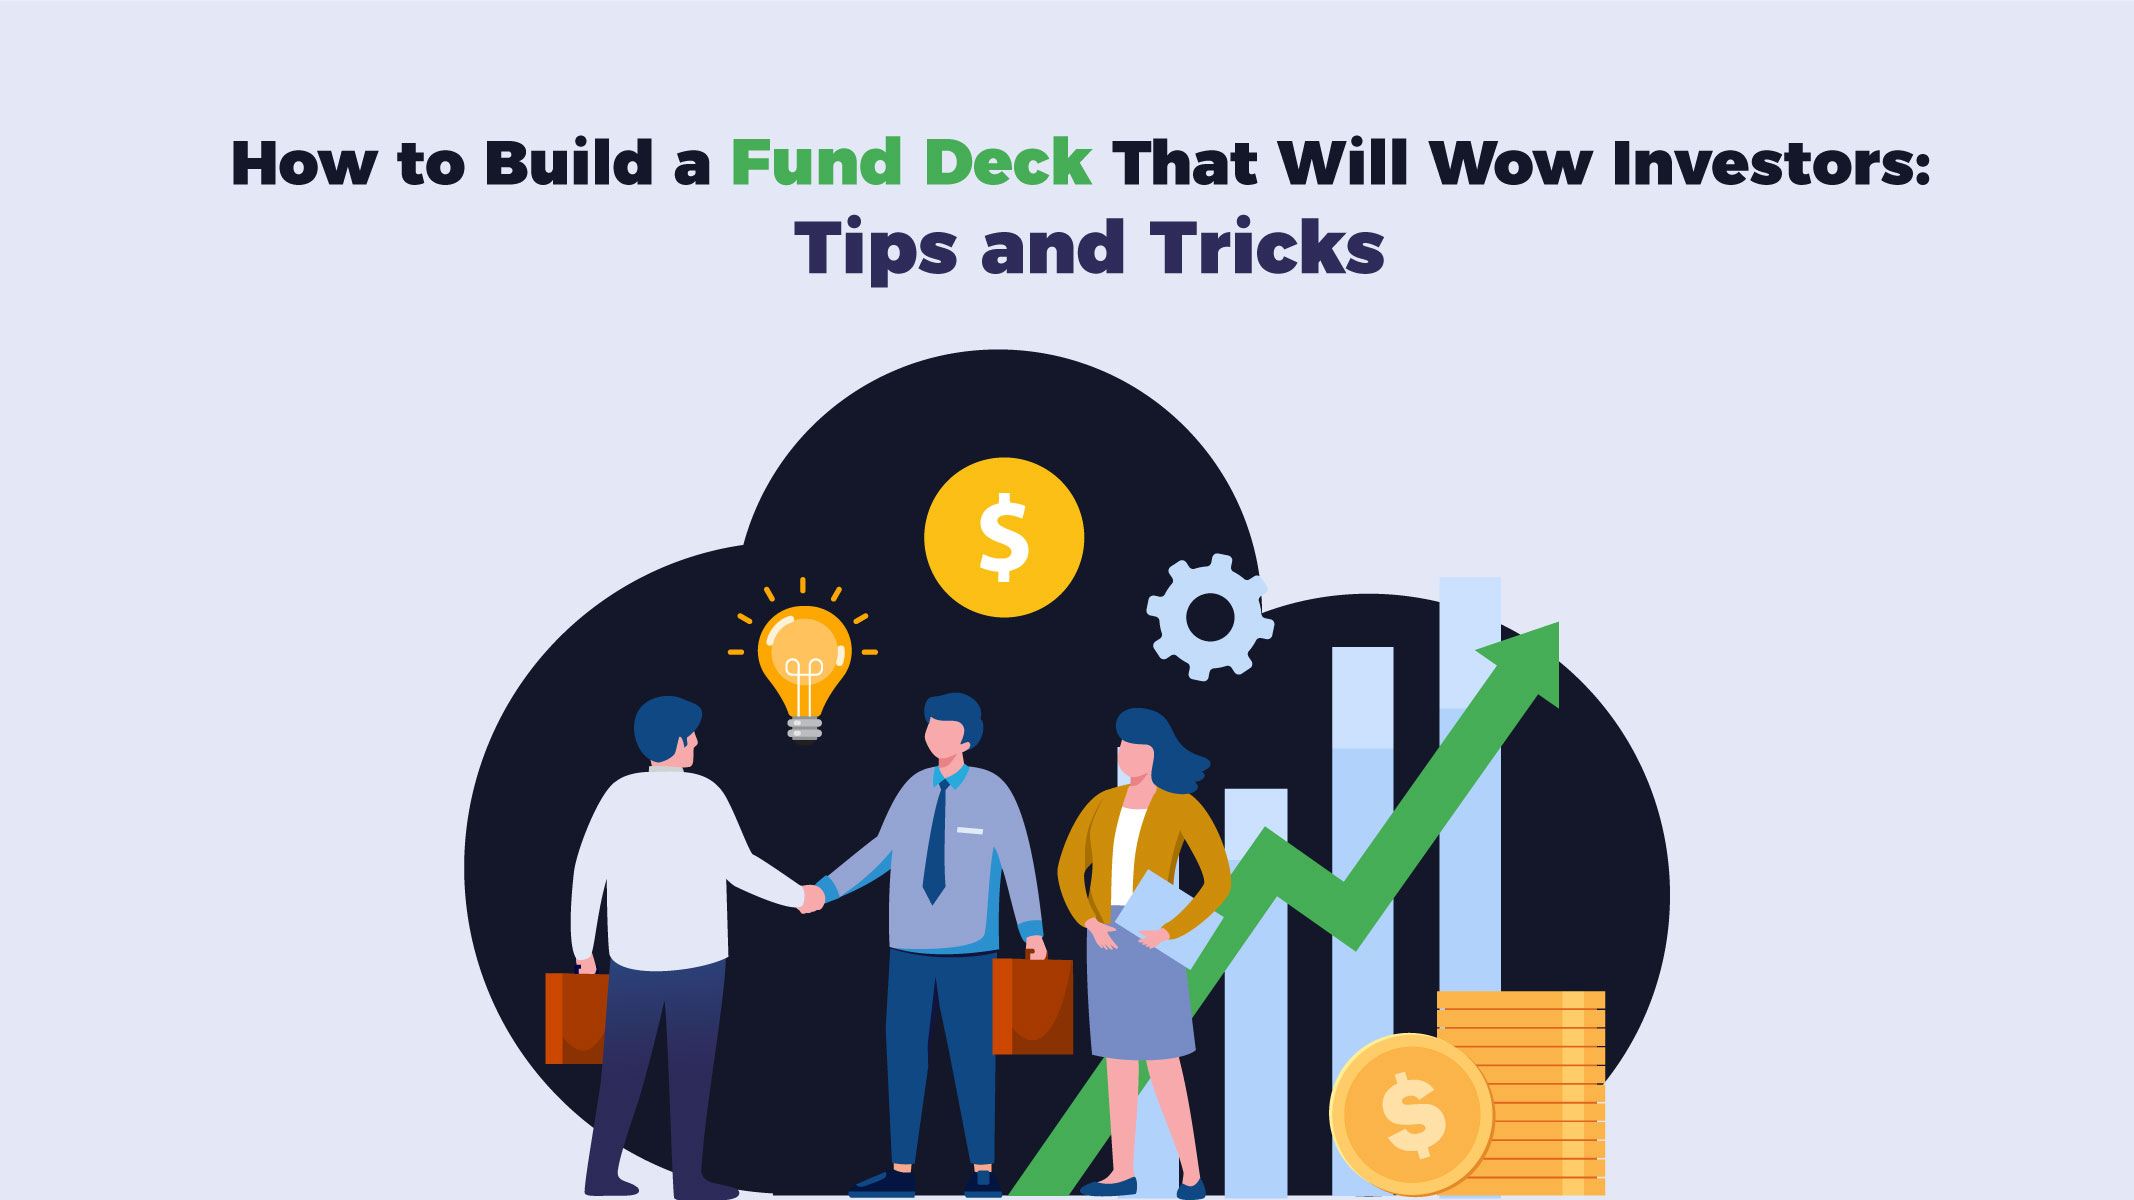 How to Build a Fund Deck That Will Wow Investors: Tips and Tricks